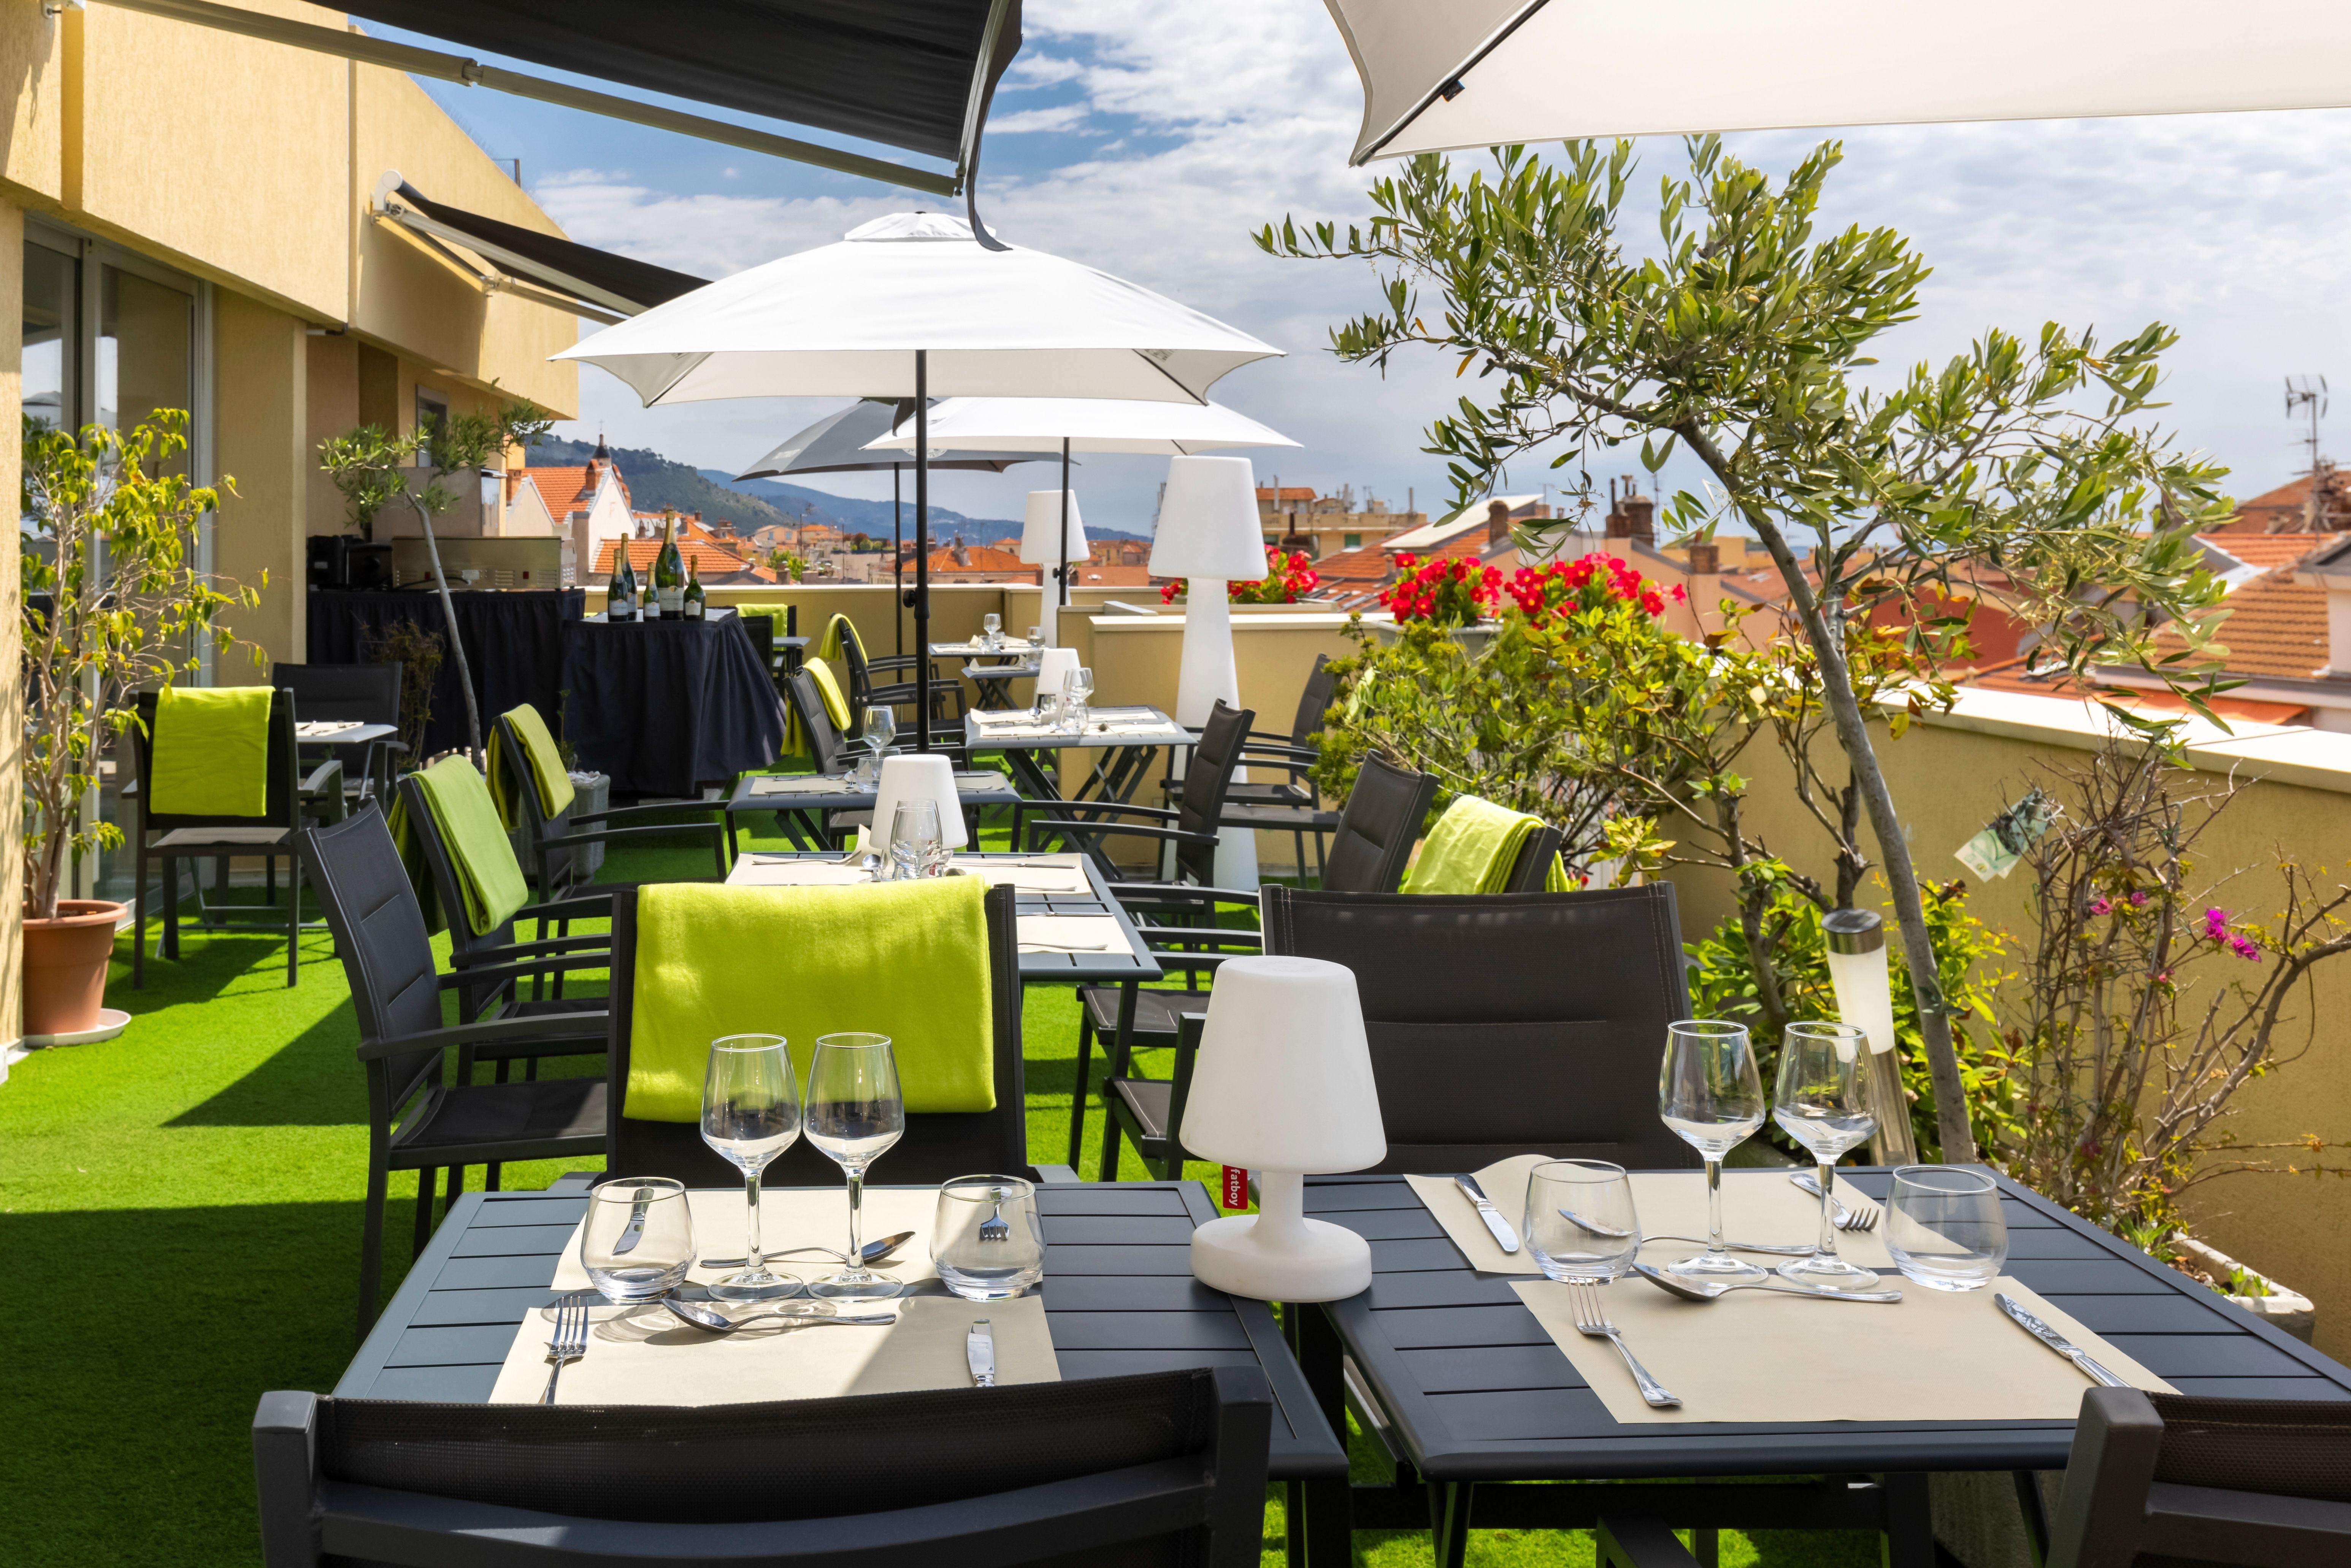 Enjoy the new menu at our rooftop restaurant in Menton